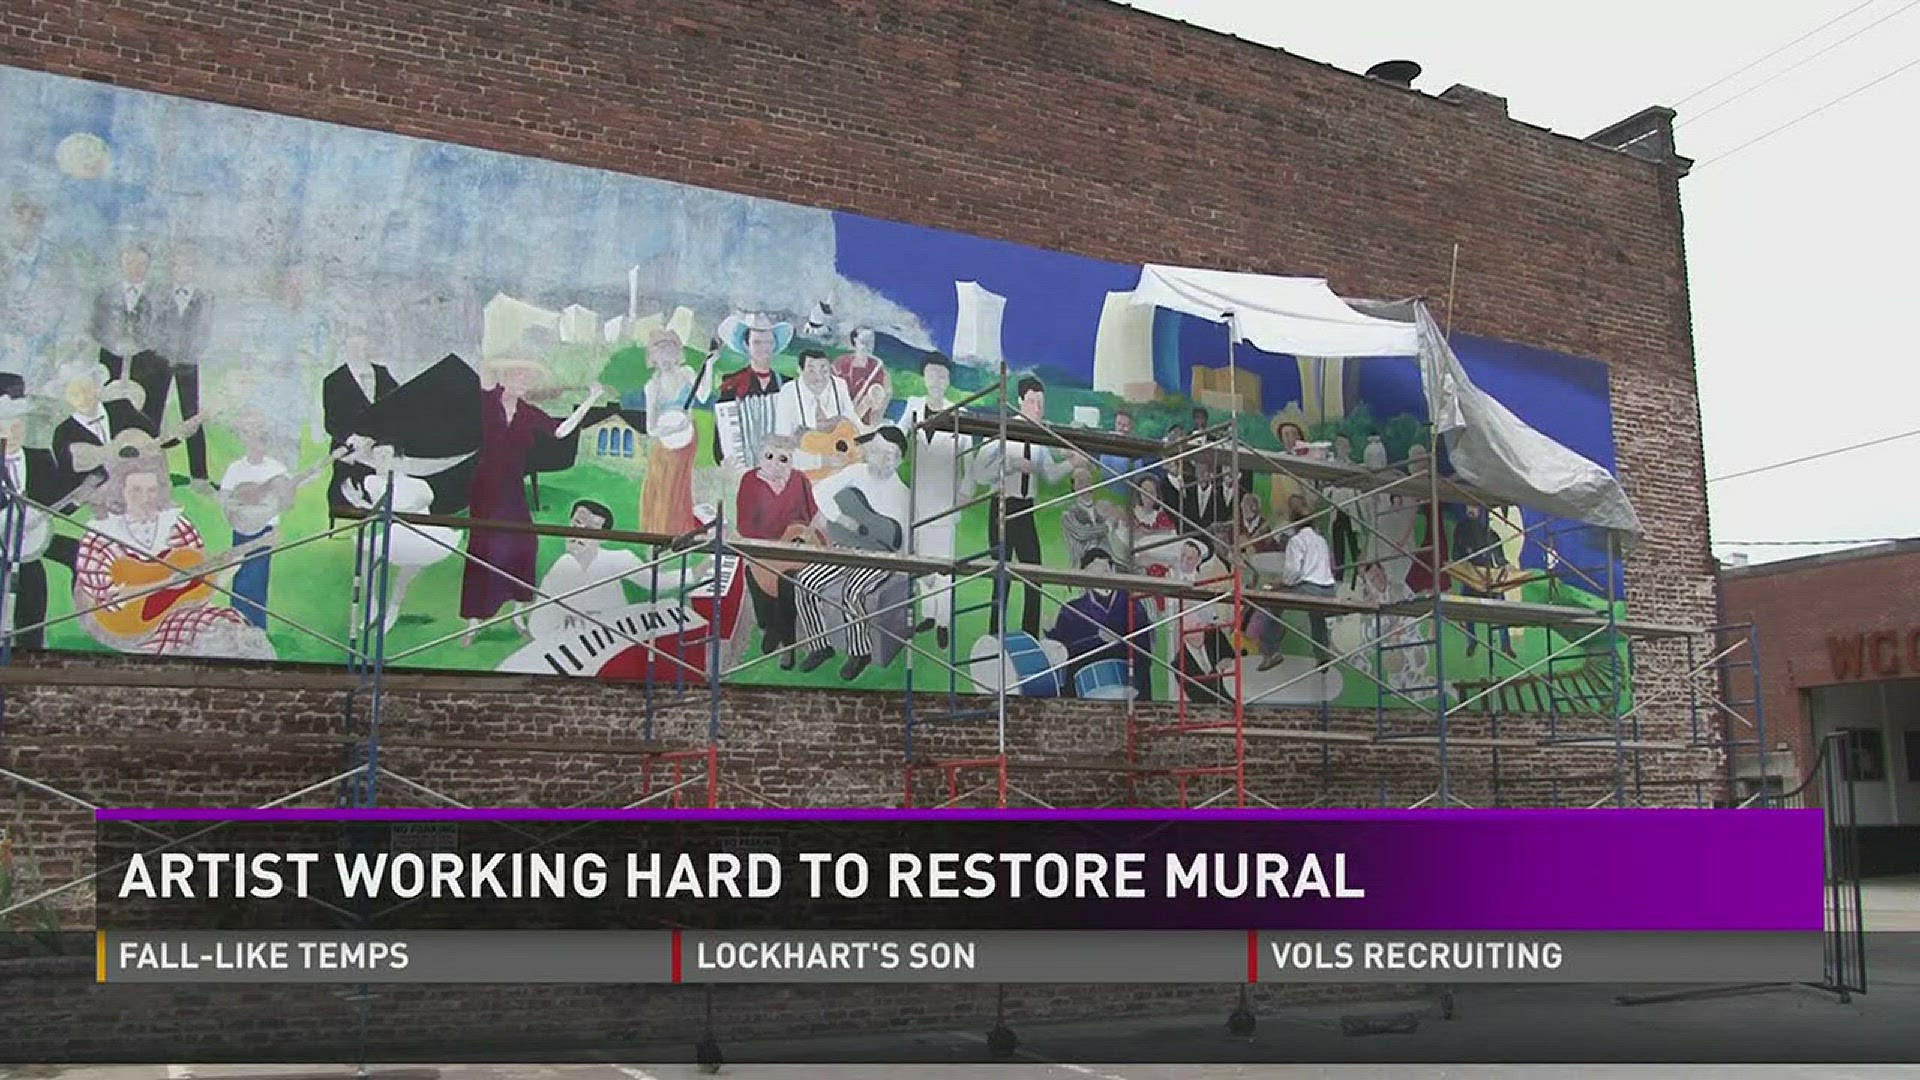 June 26, 2017: A Sevier County painter is restoring the Musician's Mural in Knoxville's Old City.